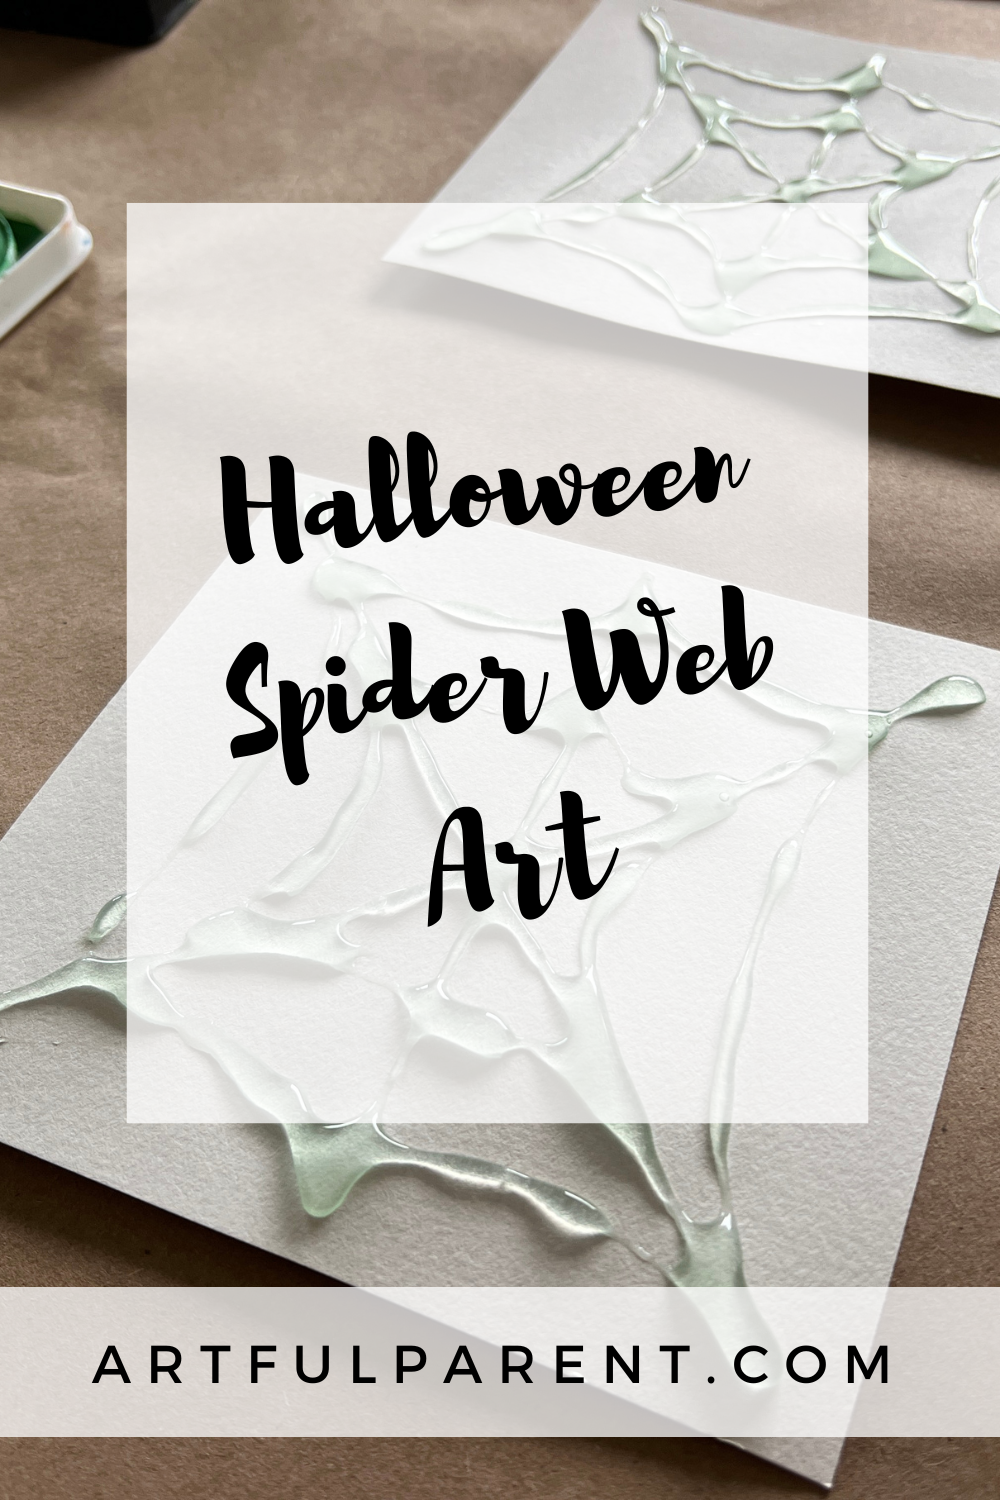 How to Do Halloween Spider Web Art